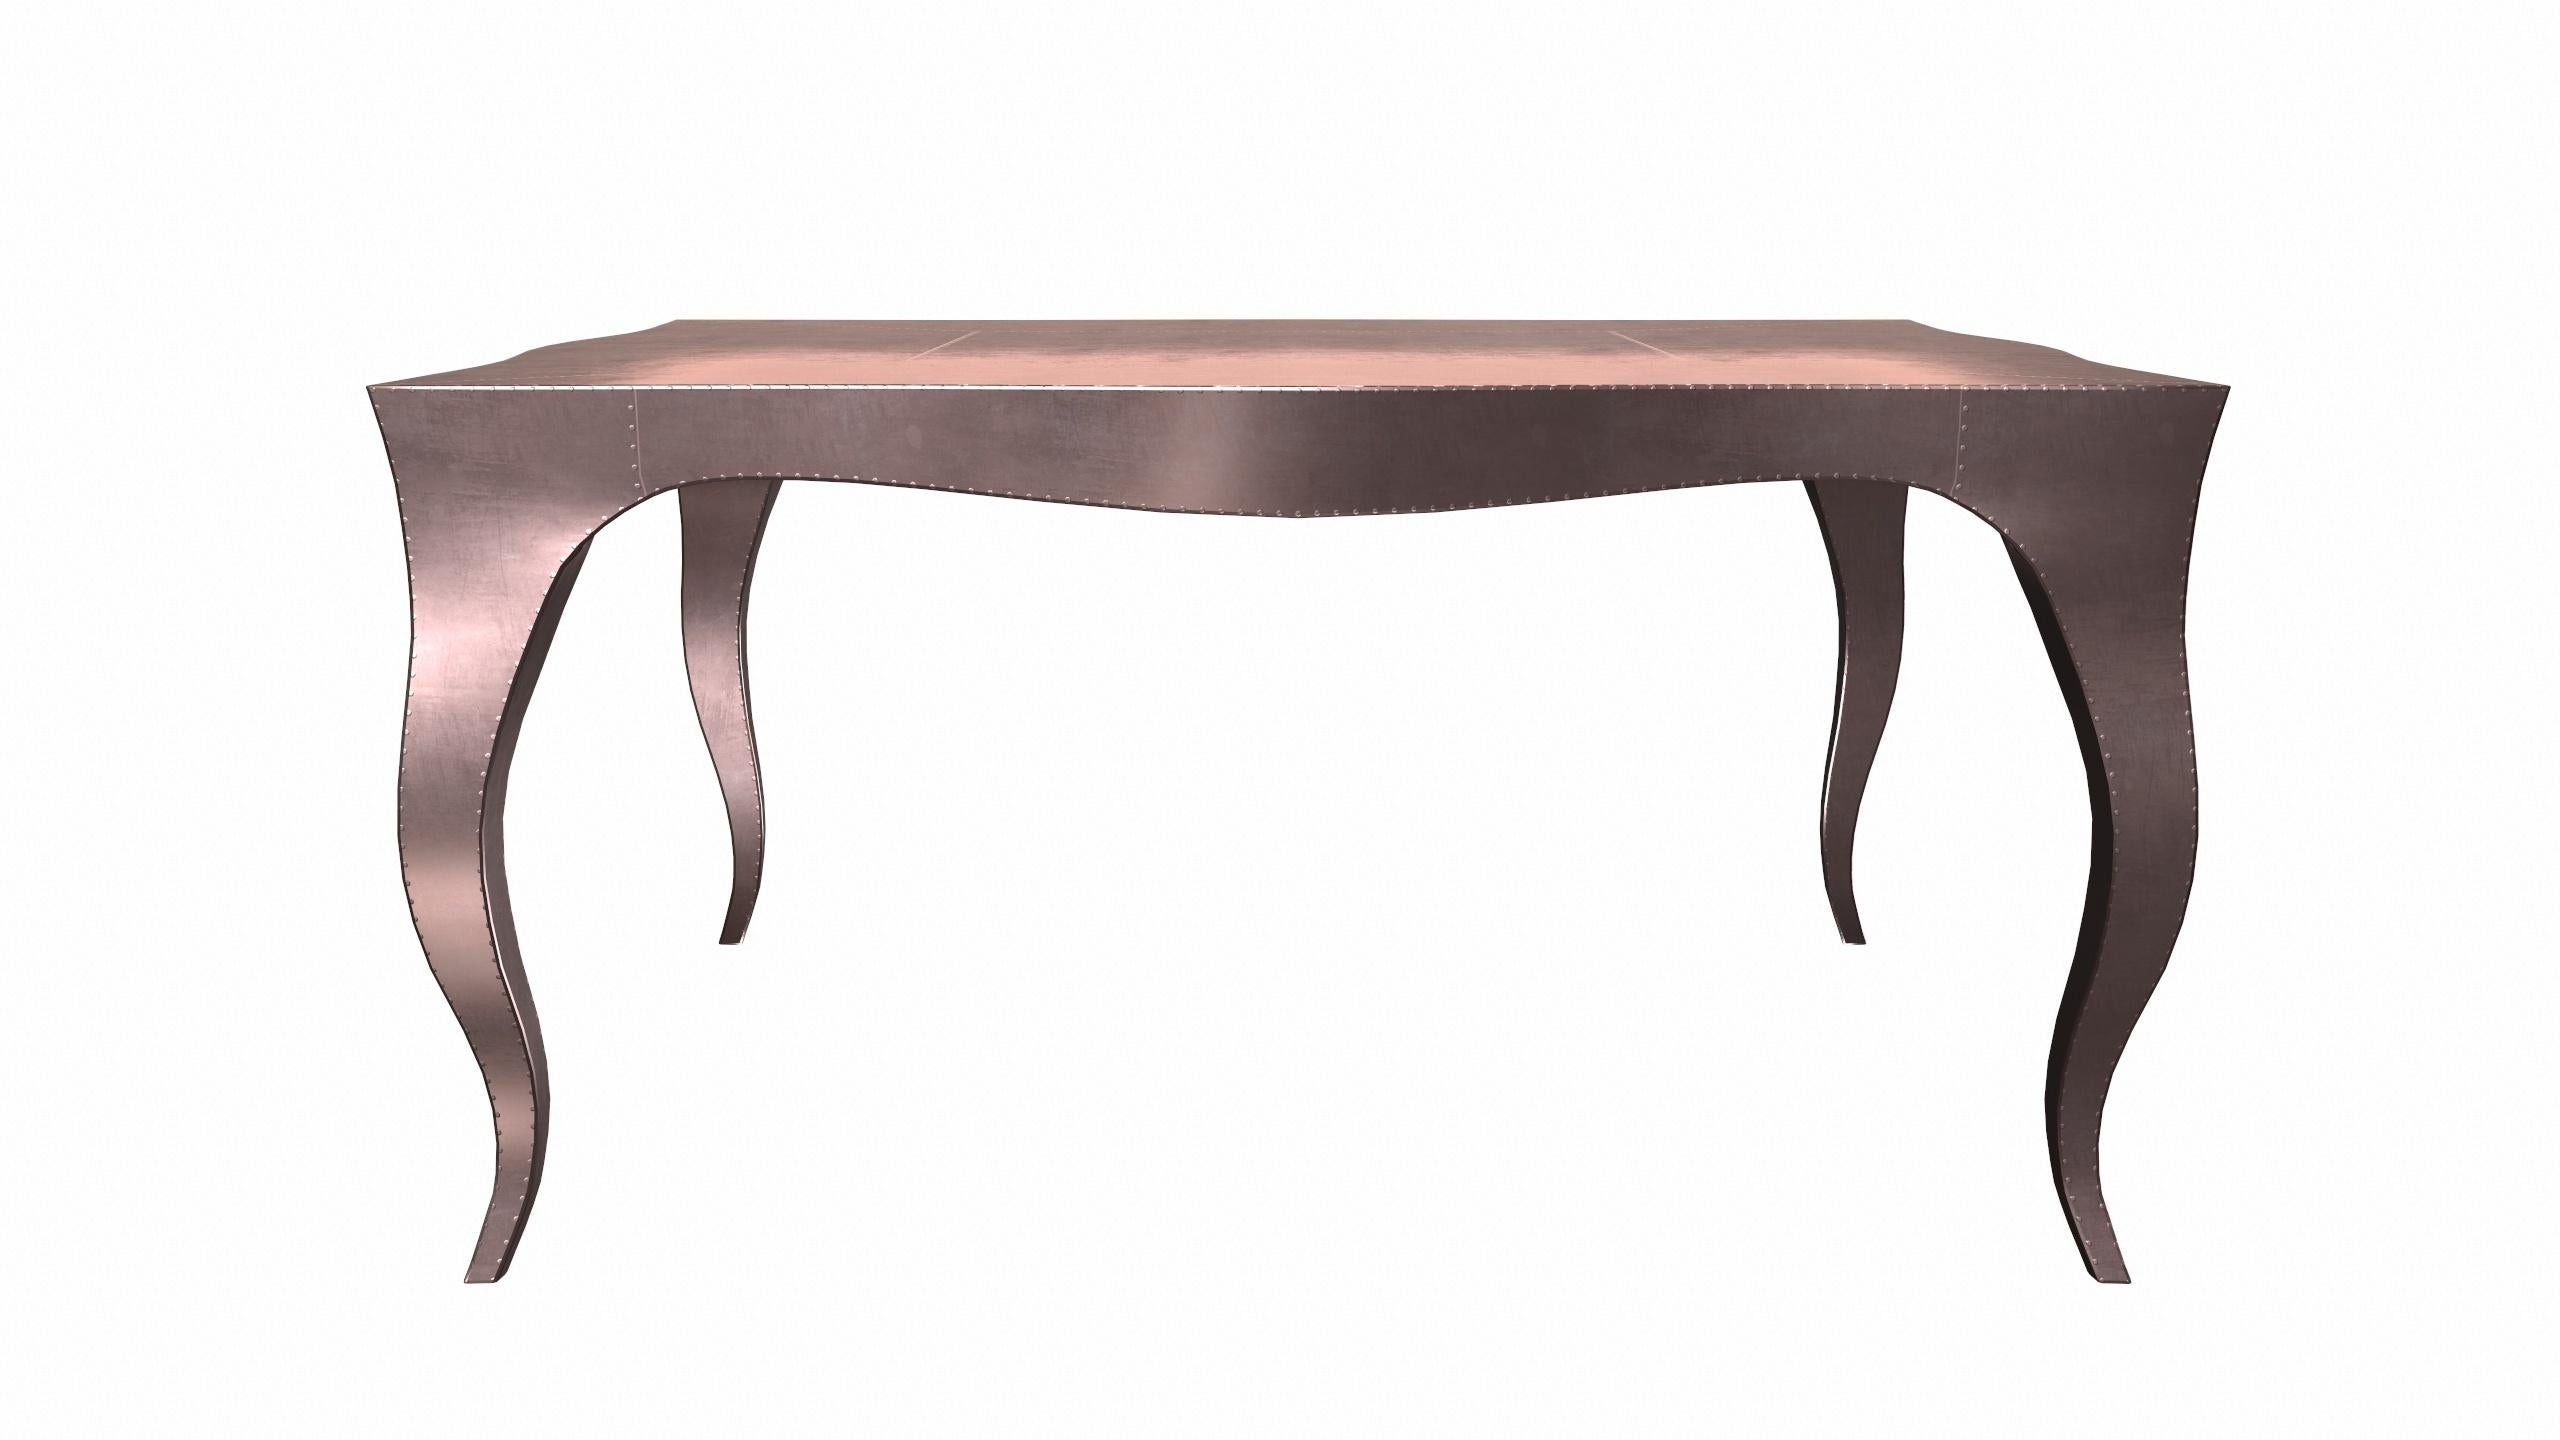 Hand-Carved Louise Art Decor Nesting Tables Smooth Copper 18.5x18.5x10 inch by Paul M. For Sale